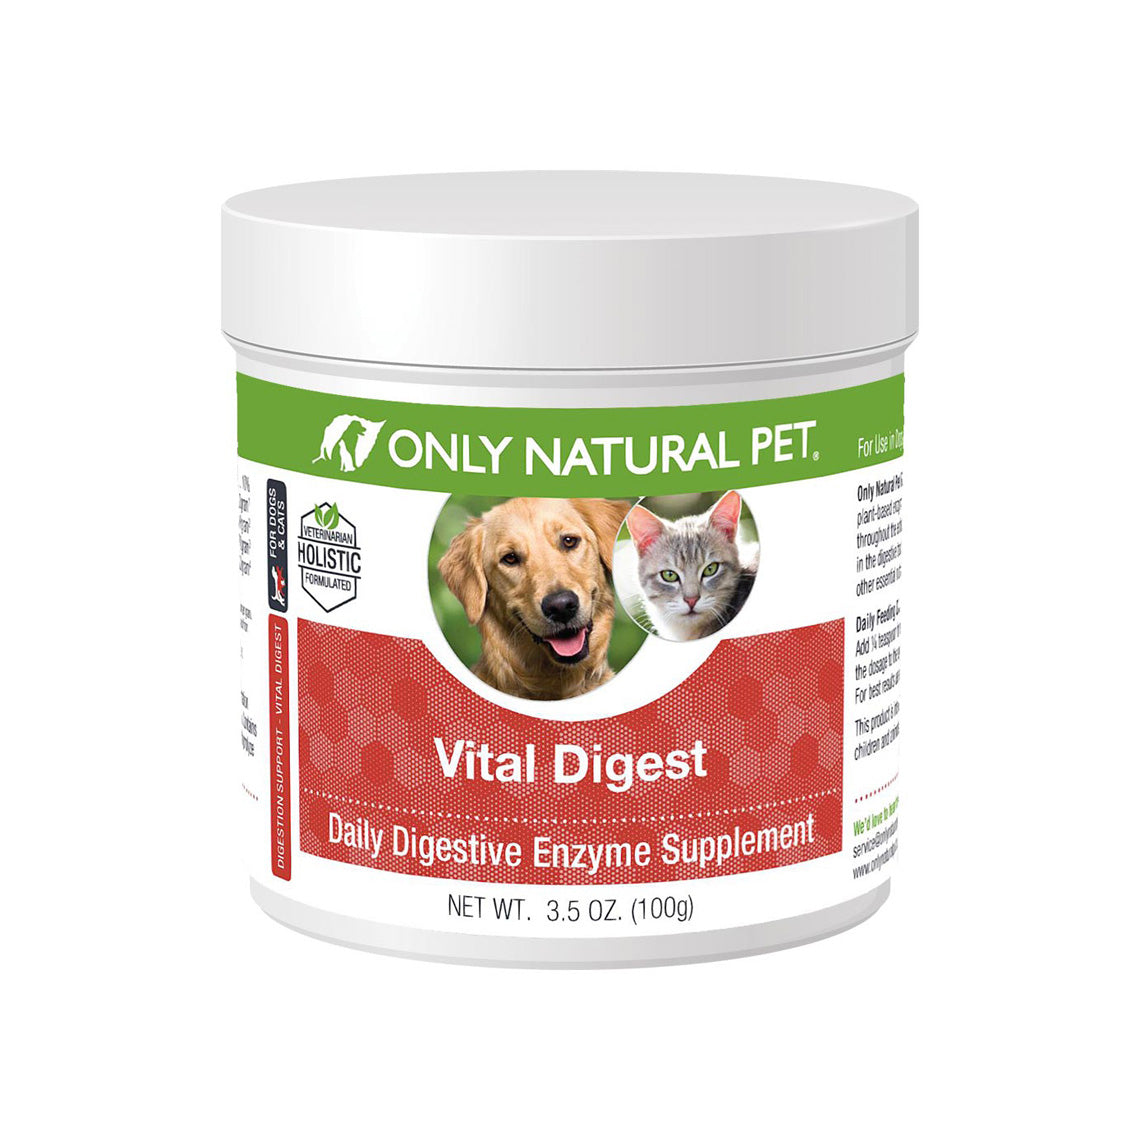 what are the best digestive enzymes for dogs